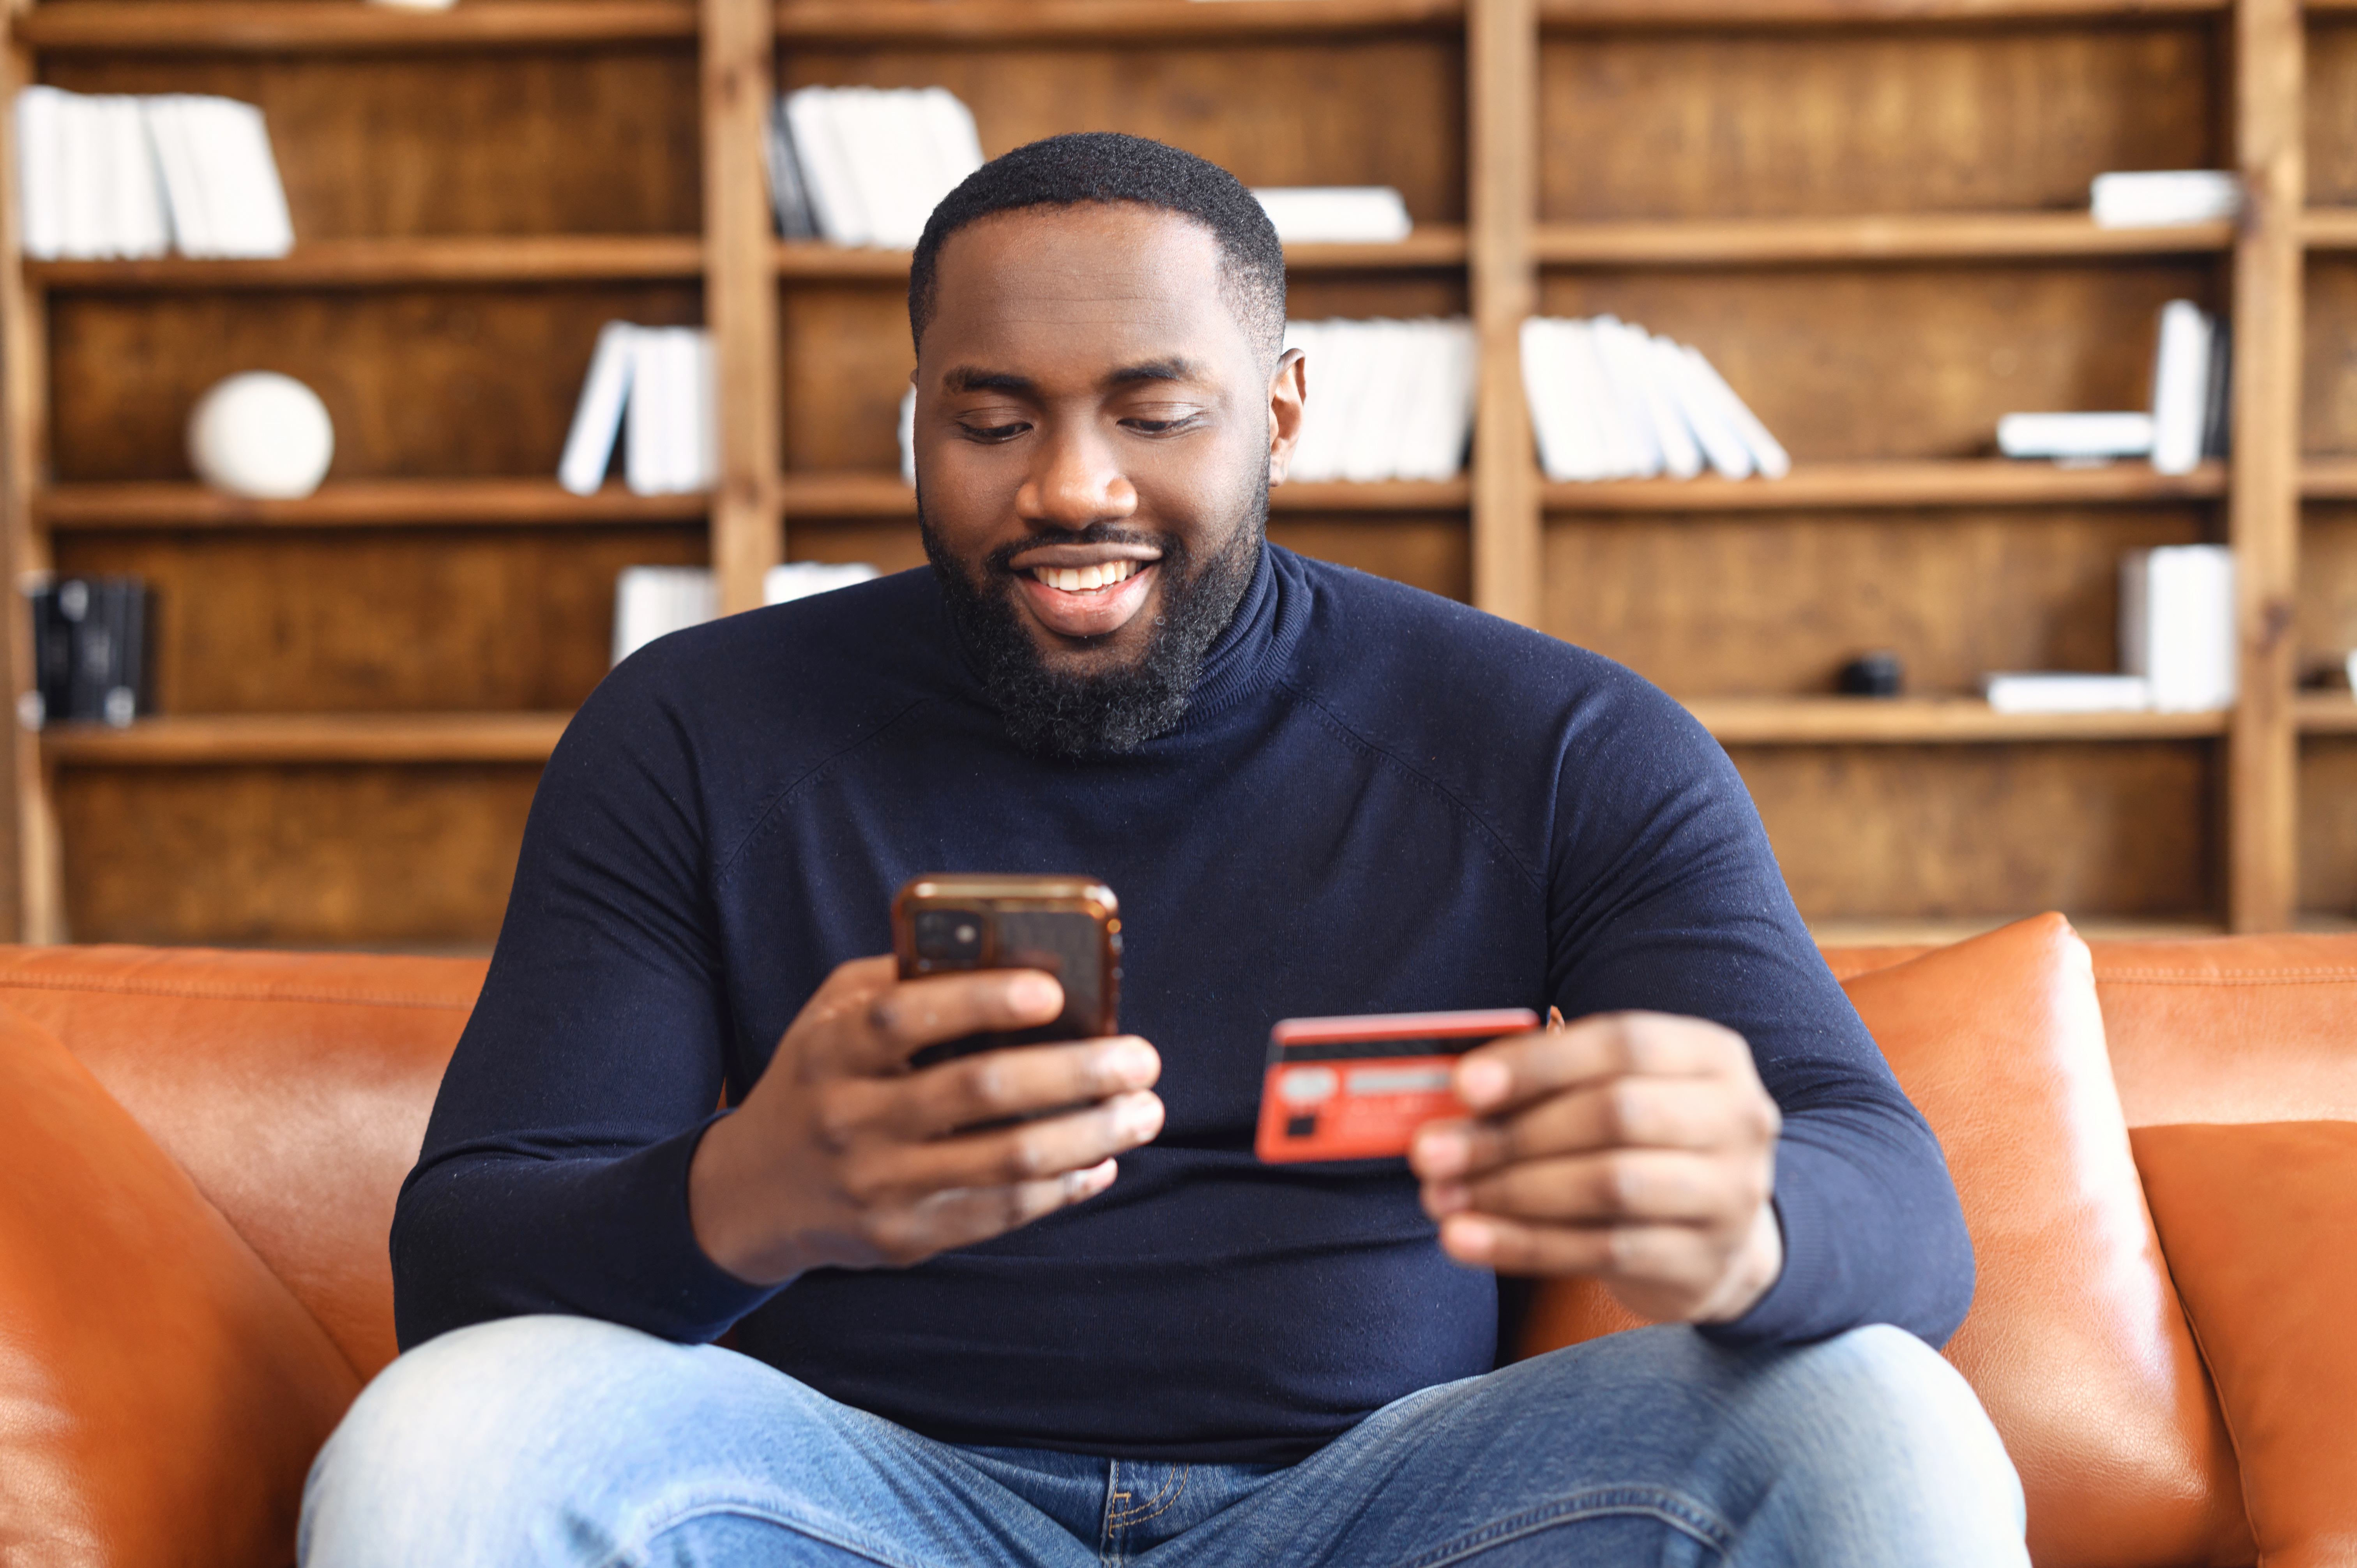 A man sits on his sofa and uses his credit card and mobile phone to manage his finances.